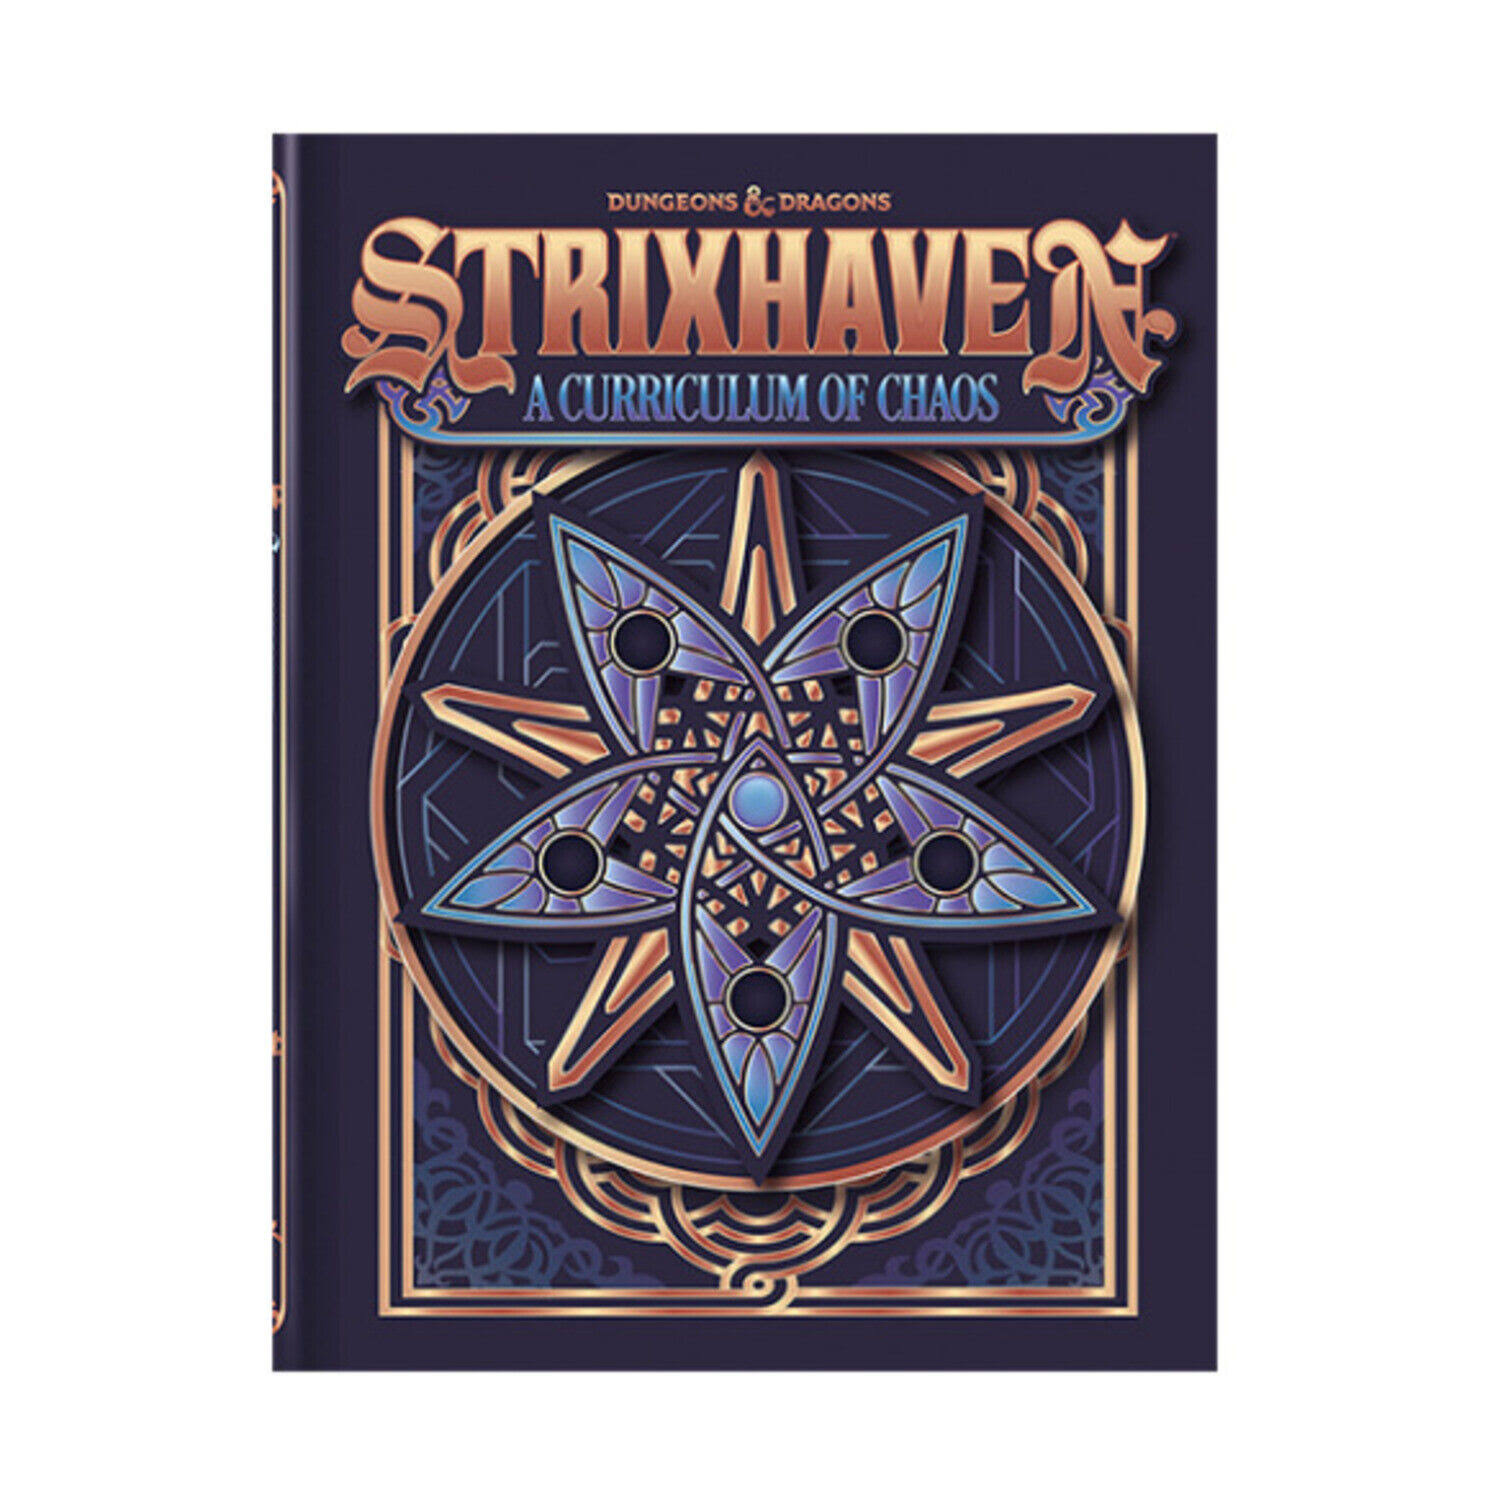 Dungeons & Dragons: Strixhaven: A Curriculum of Chaos Alt Cover